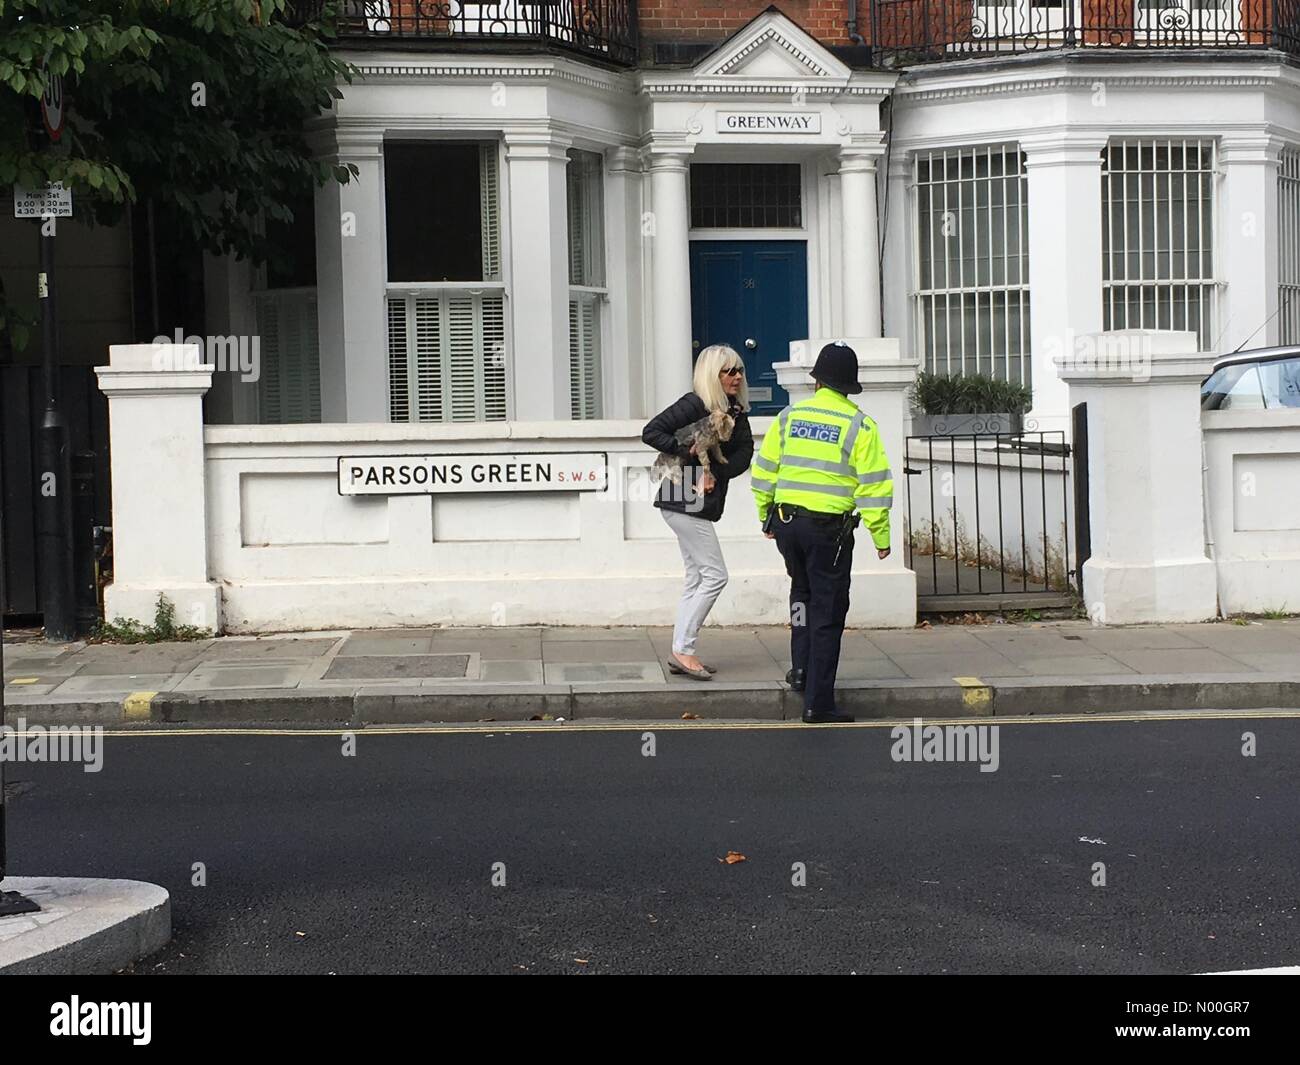 New King's Rd, London, UK. 15th Sep, 2017. Security Alert at Parsons Green. Police evacuation after incident at Parsons Green underground station Credit: amer ghazzal/StockimoNews/Alamy Live News Stock Photo